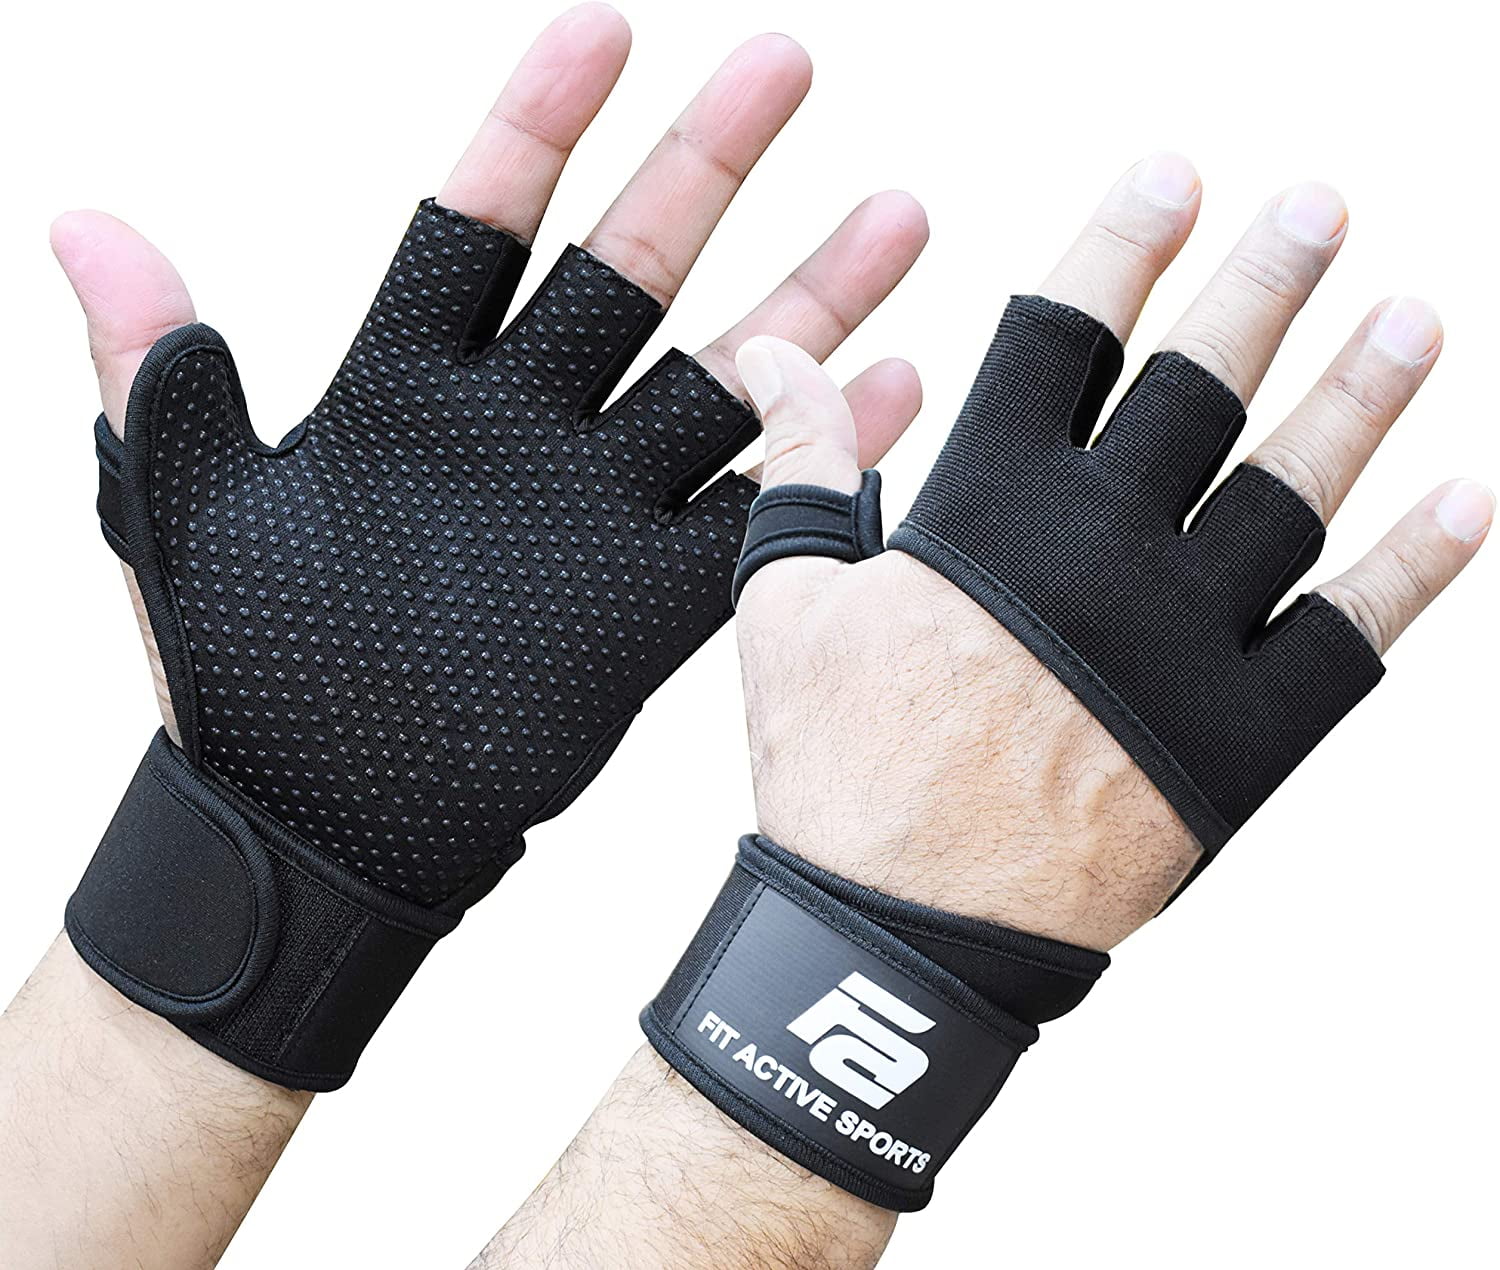 Cross Training Gloves with Wrist Support for WODs Weightlifting XL Gym Workout 